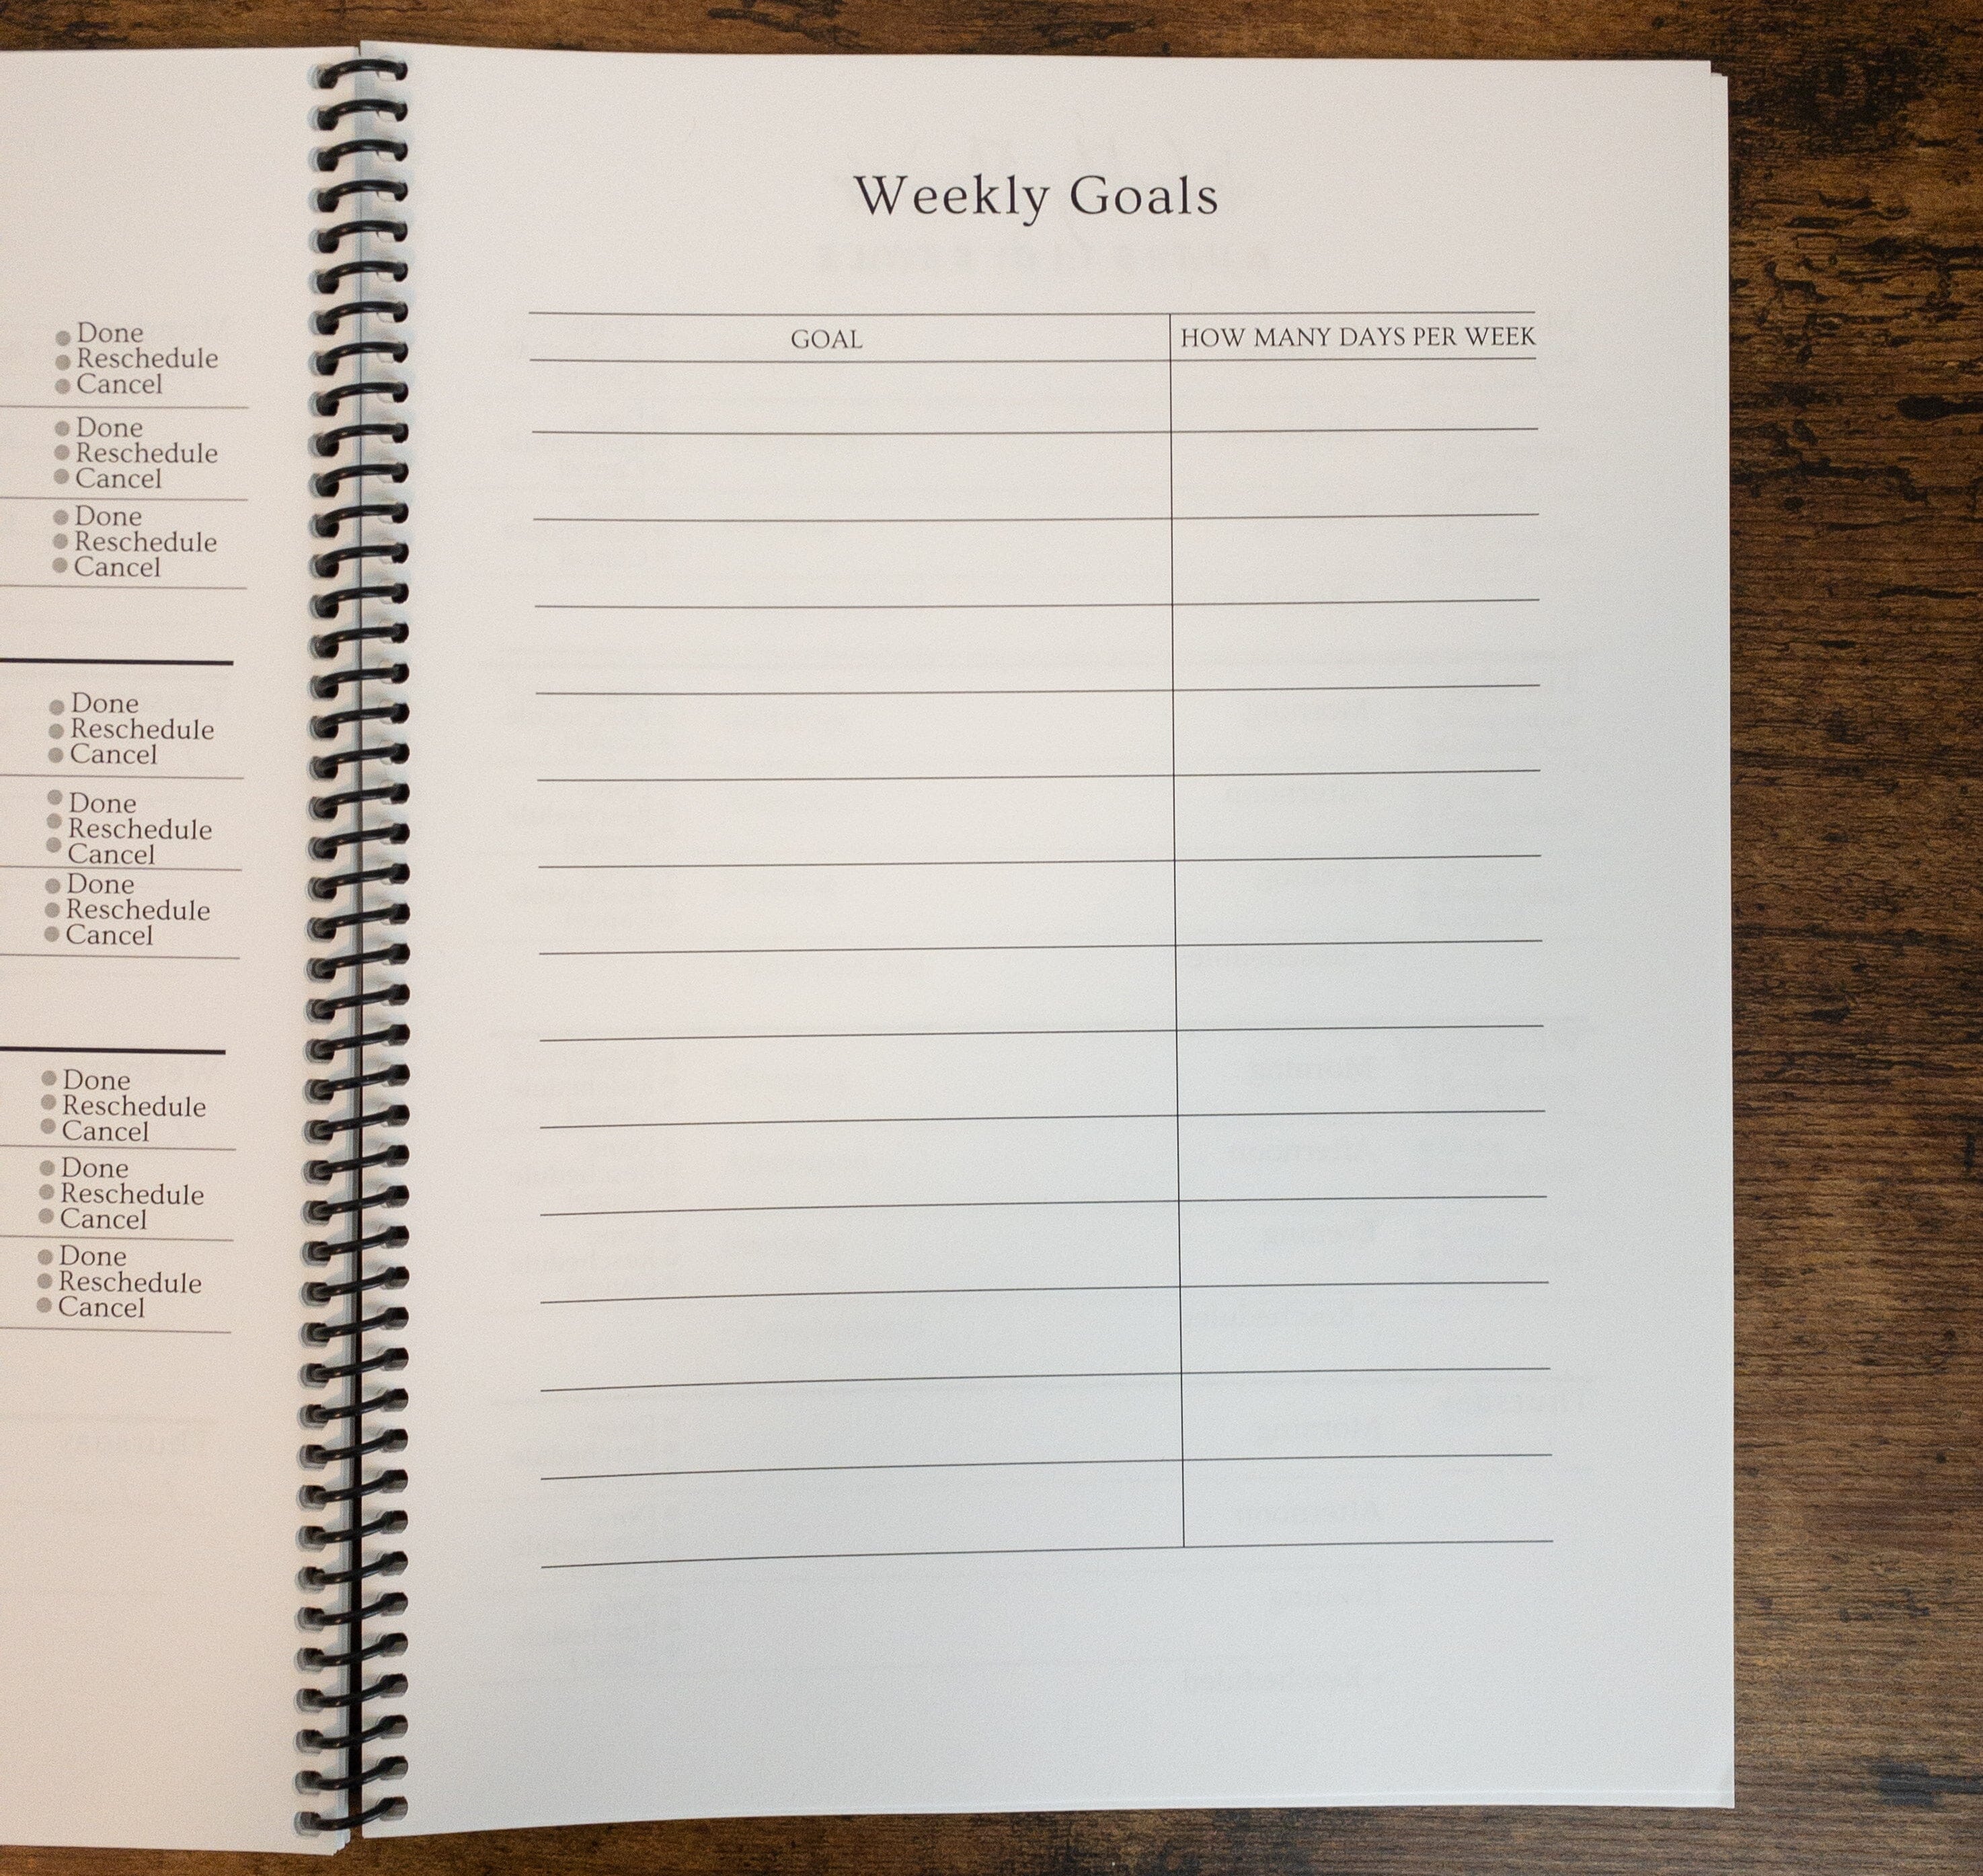 Weekly Schedule Planner (Notebook) The Autistic Innovator 